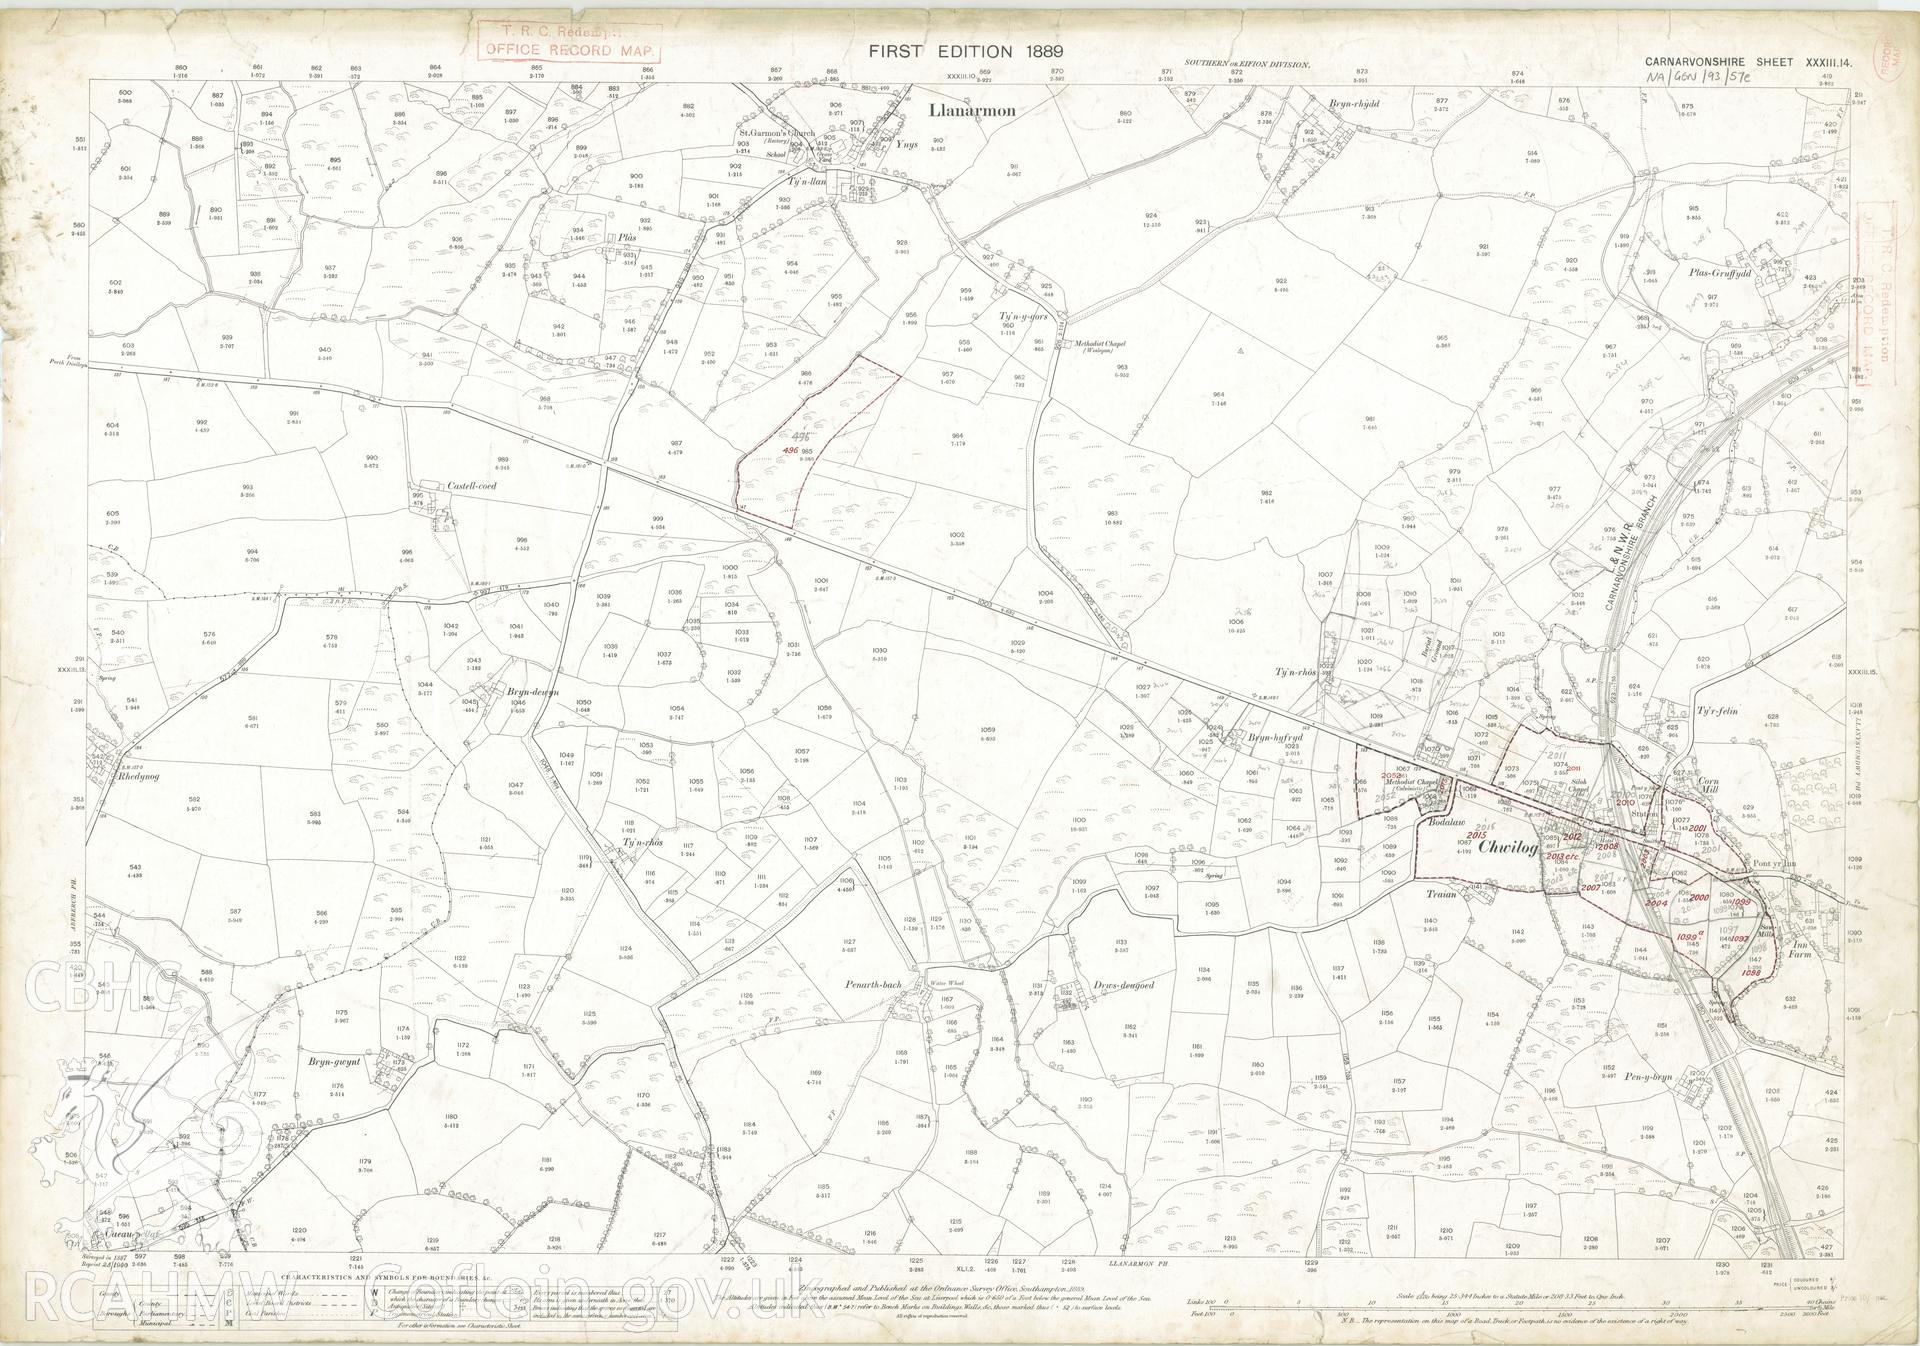 Digitized copy of Ordnance Survey First Edition 25 inch map of Chwilog area 1889.